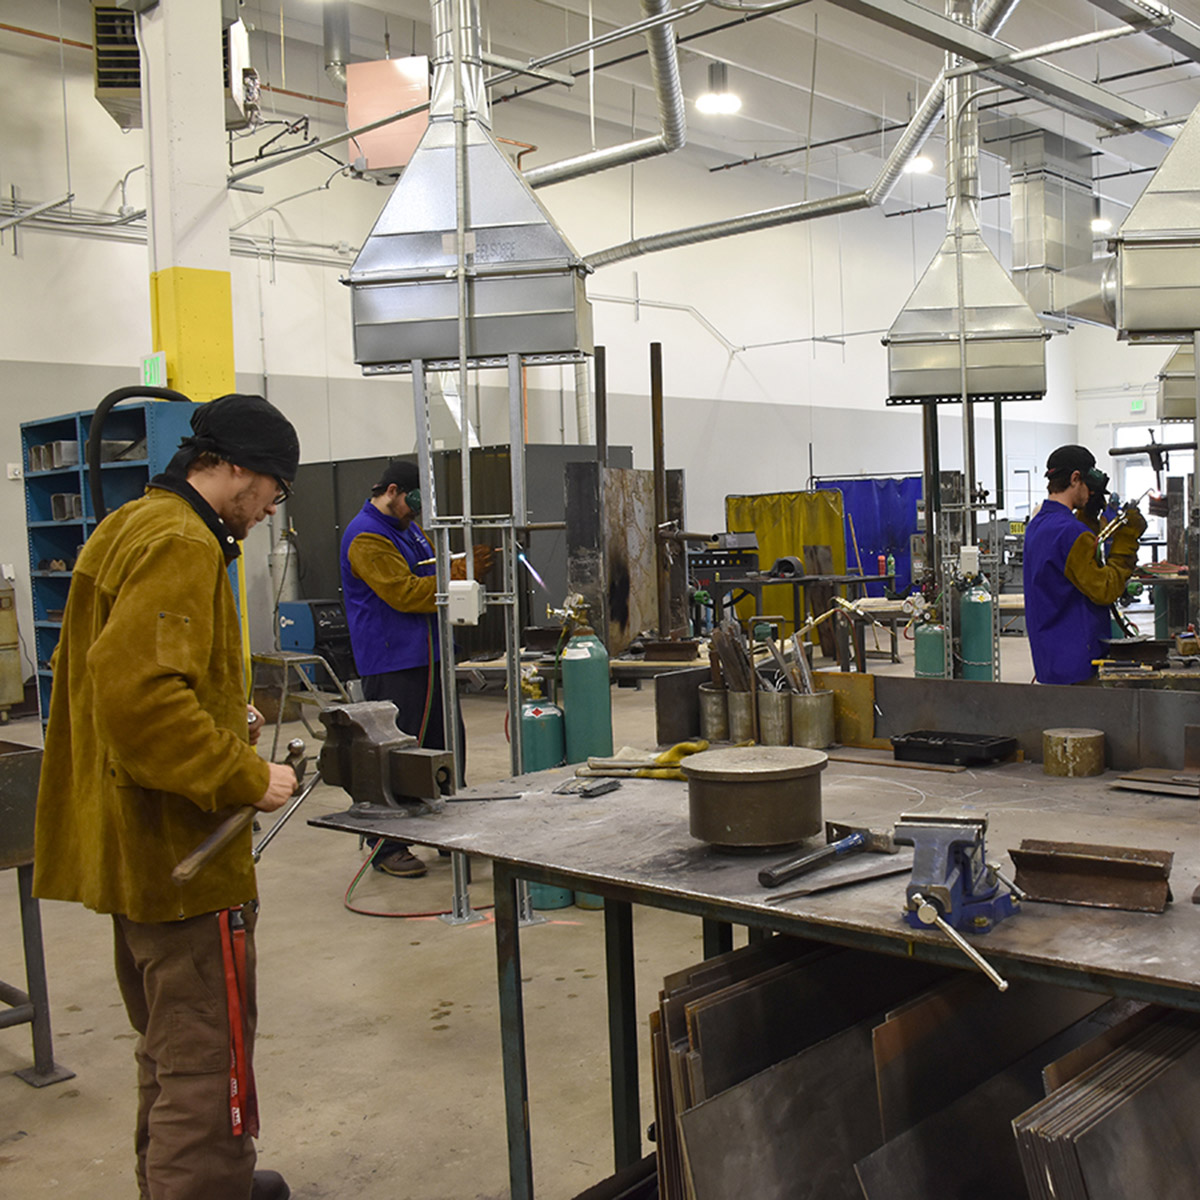 CCD Applied Technology students in a workshop